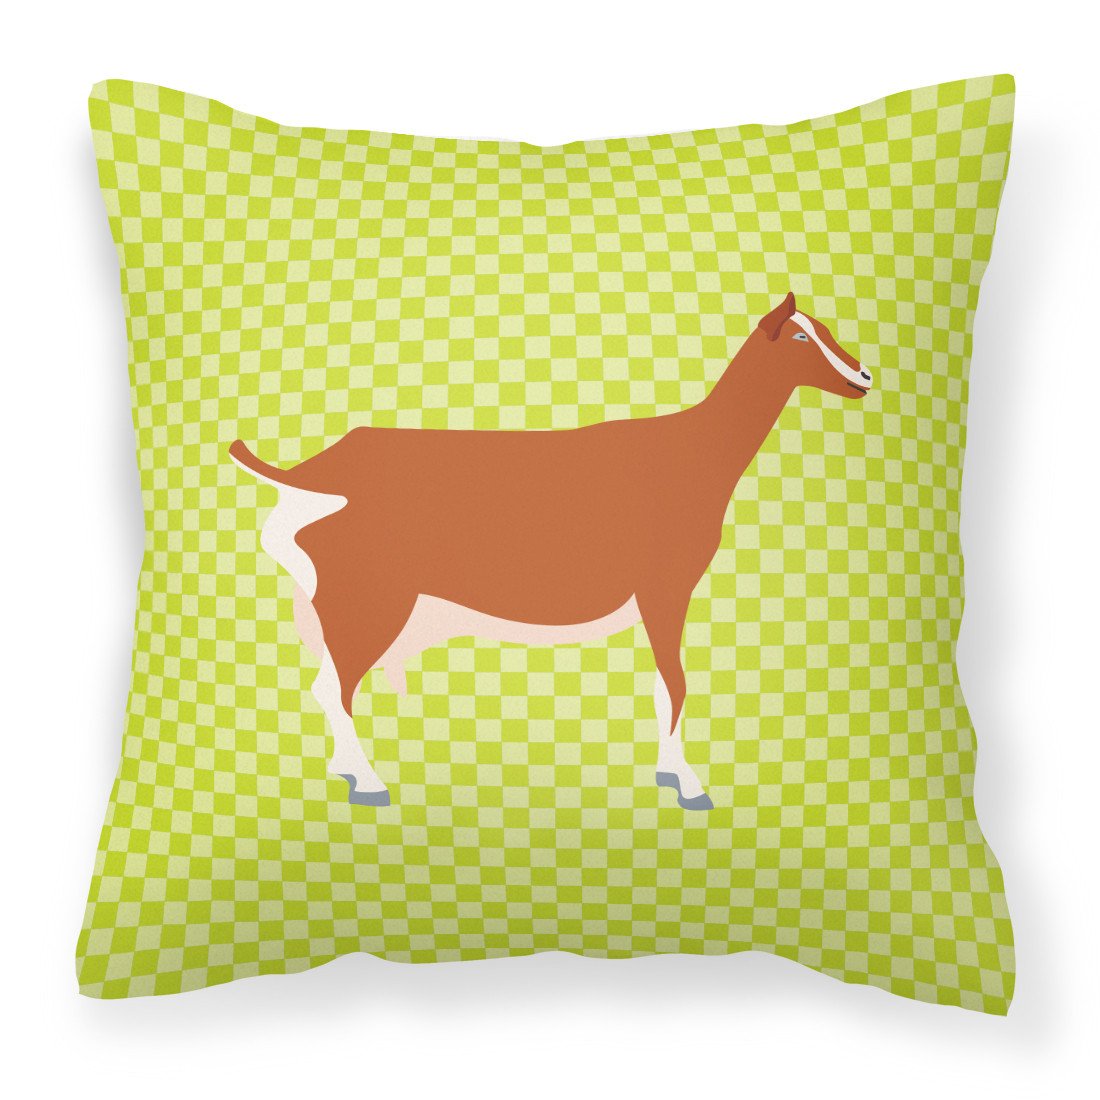 Toggenburger Goat Green Fabric Decorative Pillow BB7707PW1818 by Caroline's Treasures